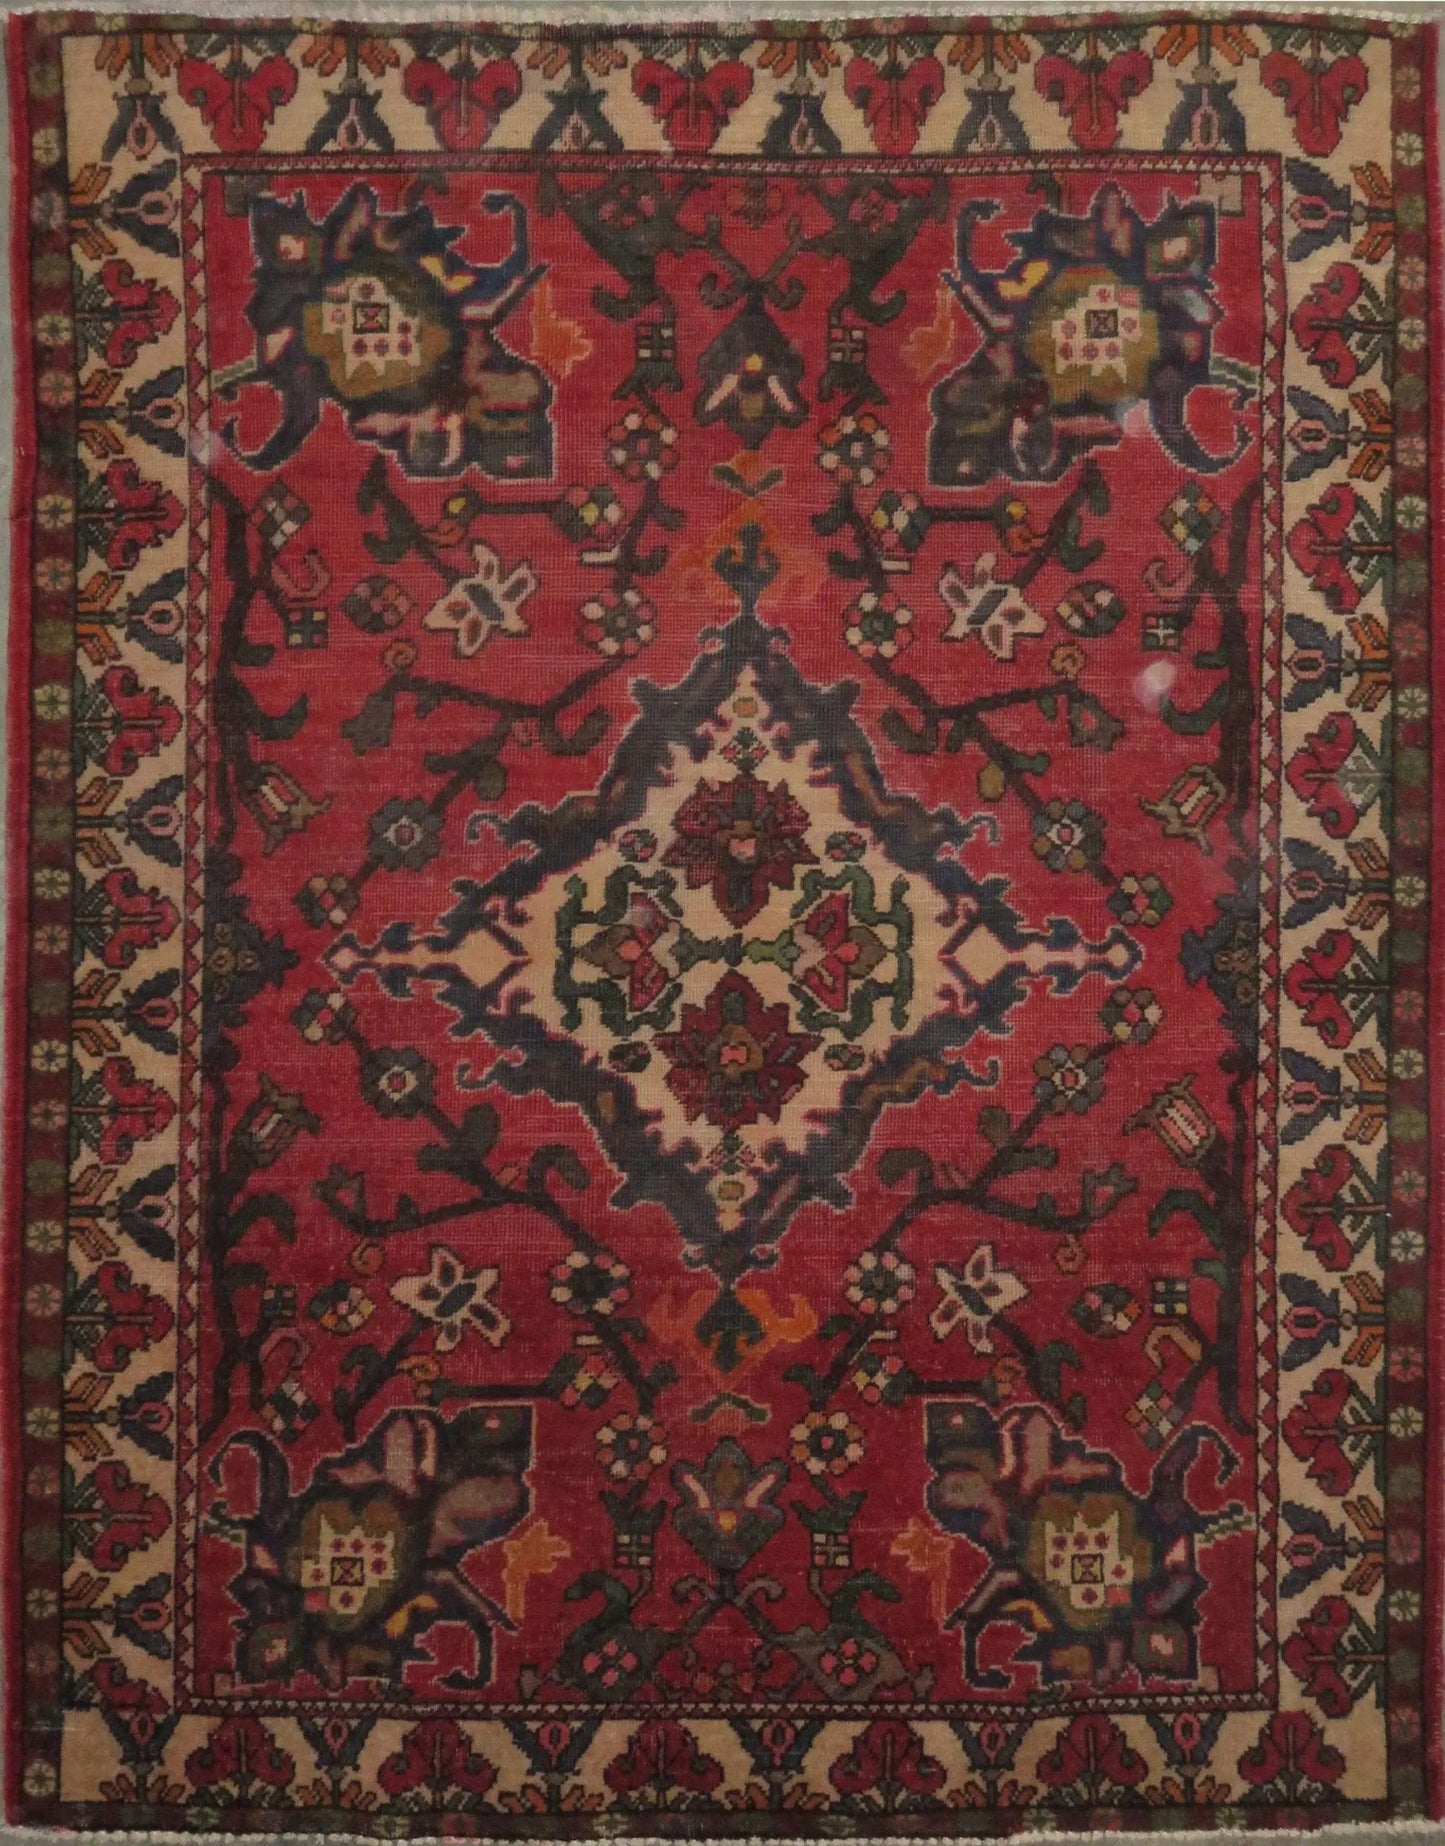 Hand-Knotted Persian Wool Rug _ Luxurious Vintage Design, 6'6" x 4'9", Artisan Crafted